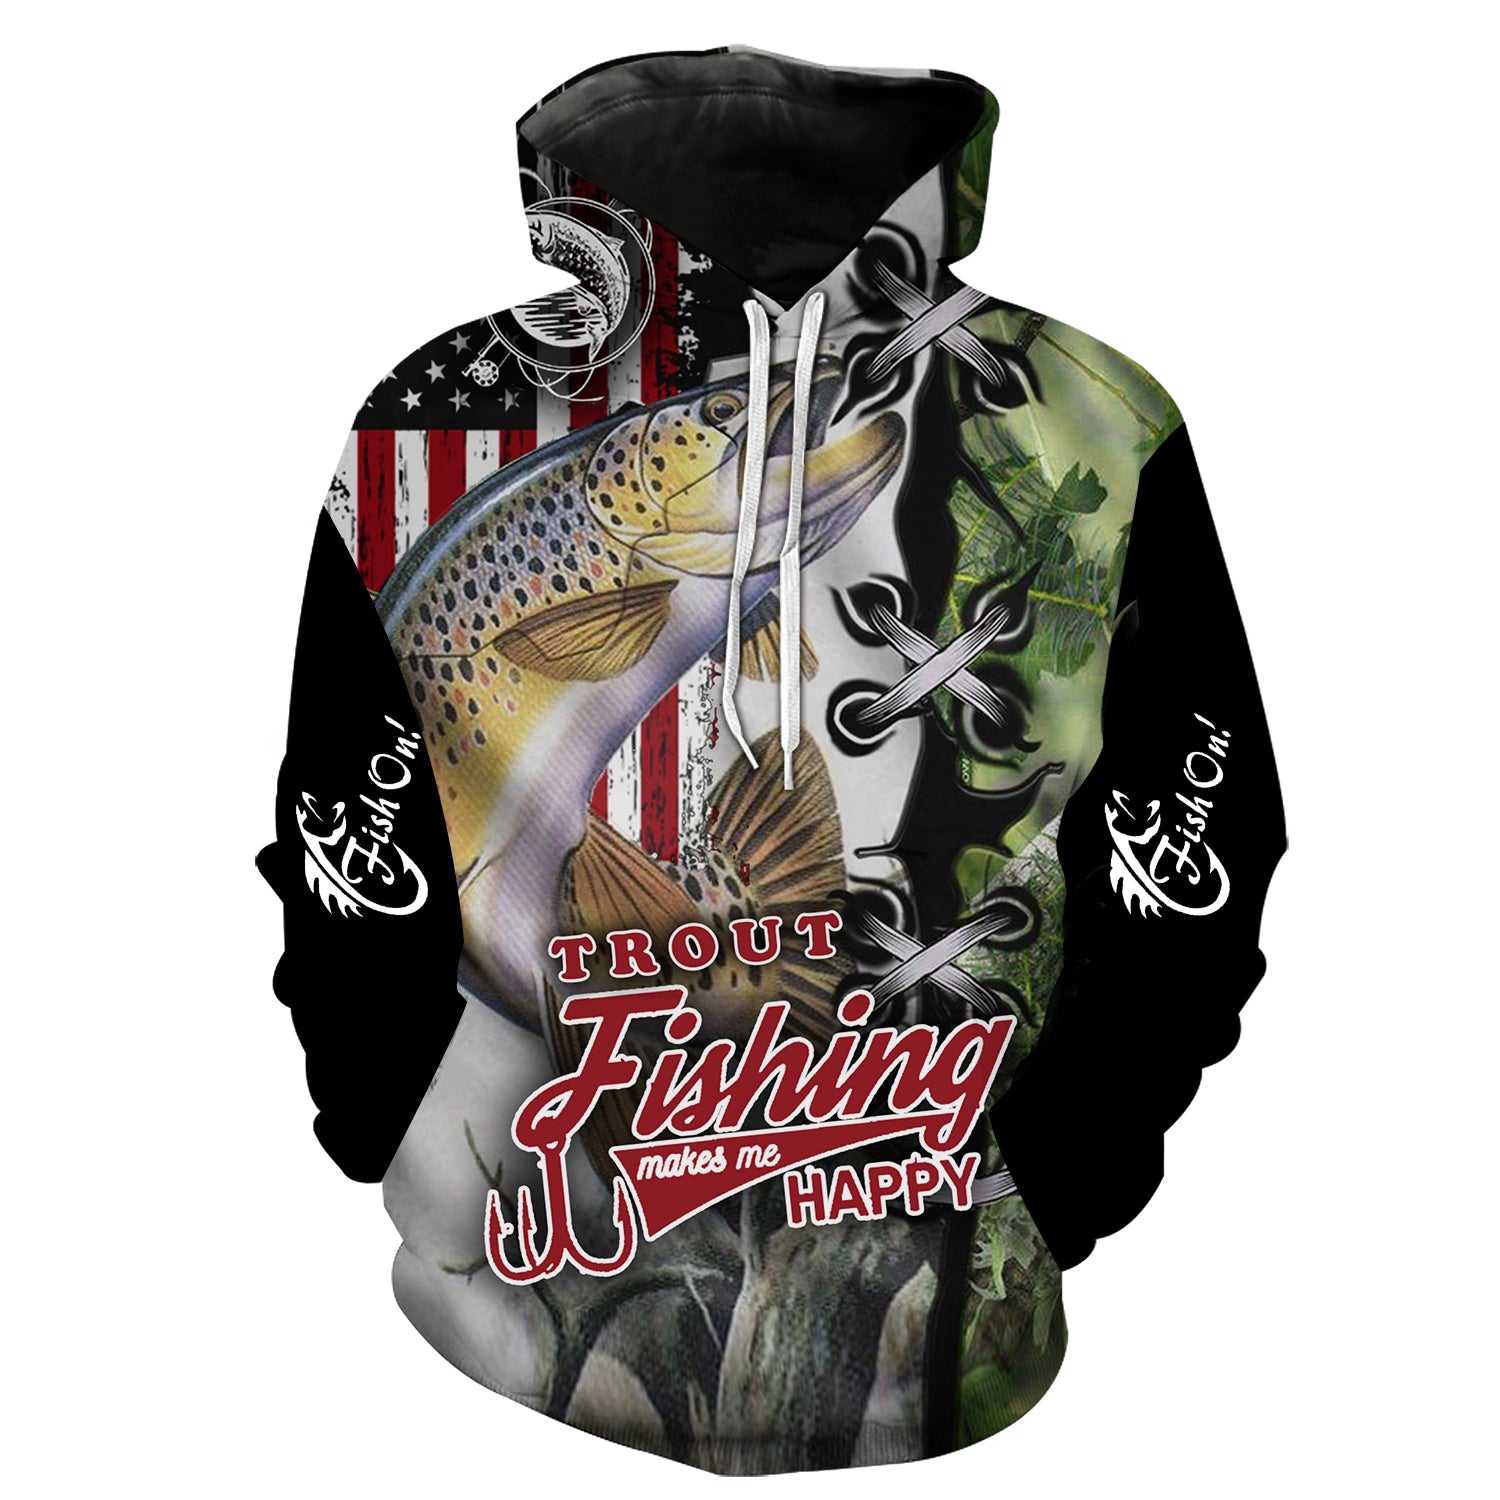 Trout Fishing makes me happy - Hoodie